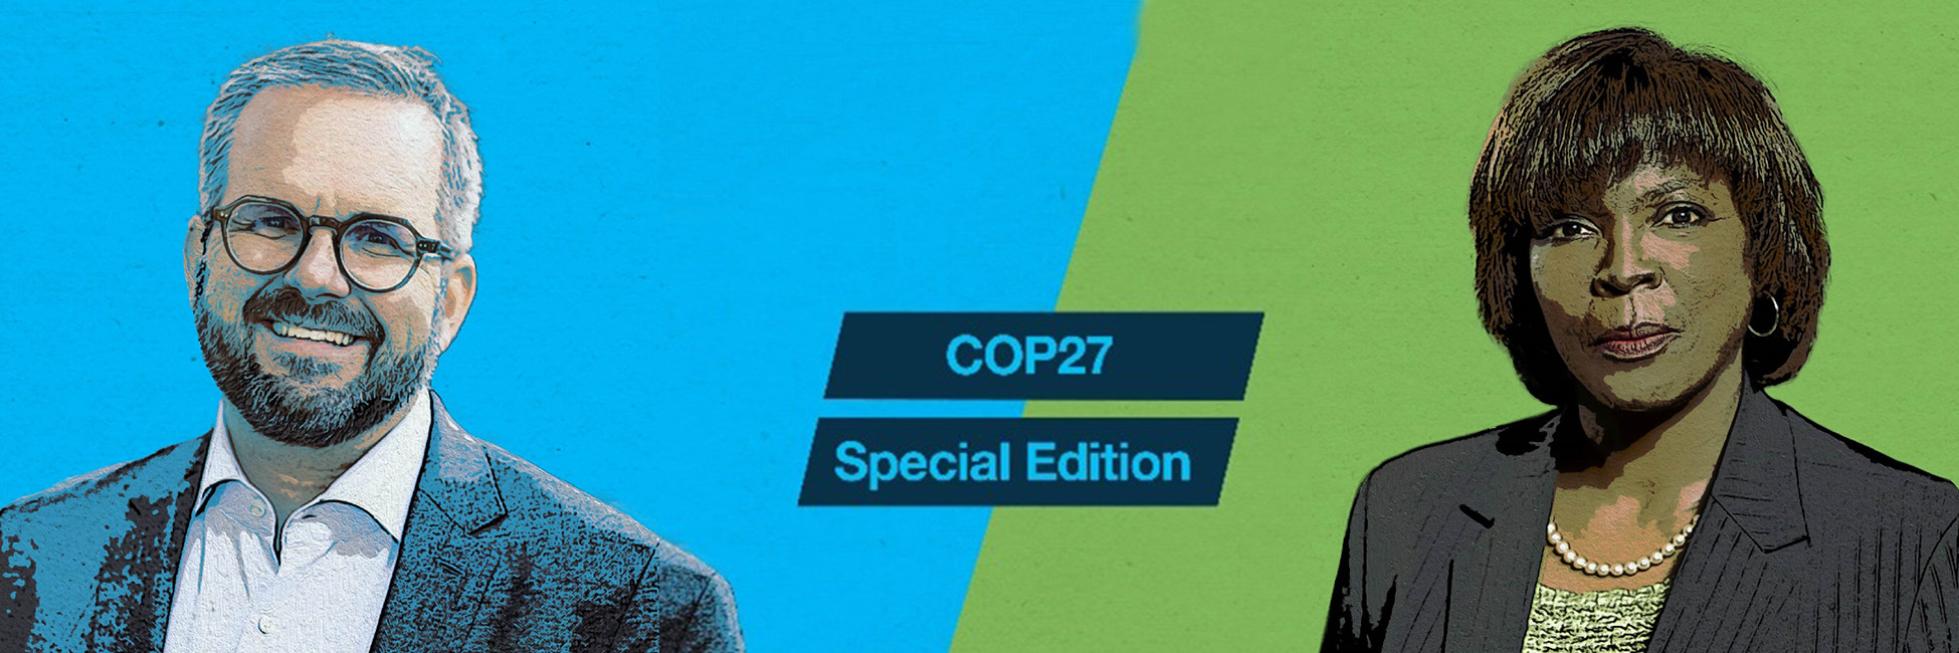 Headlines of the Future podcast episode 7 titled “COP27 and the fight against climate change”